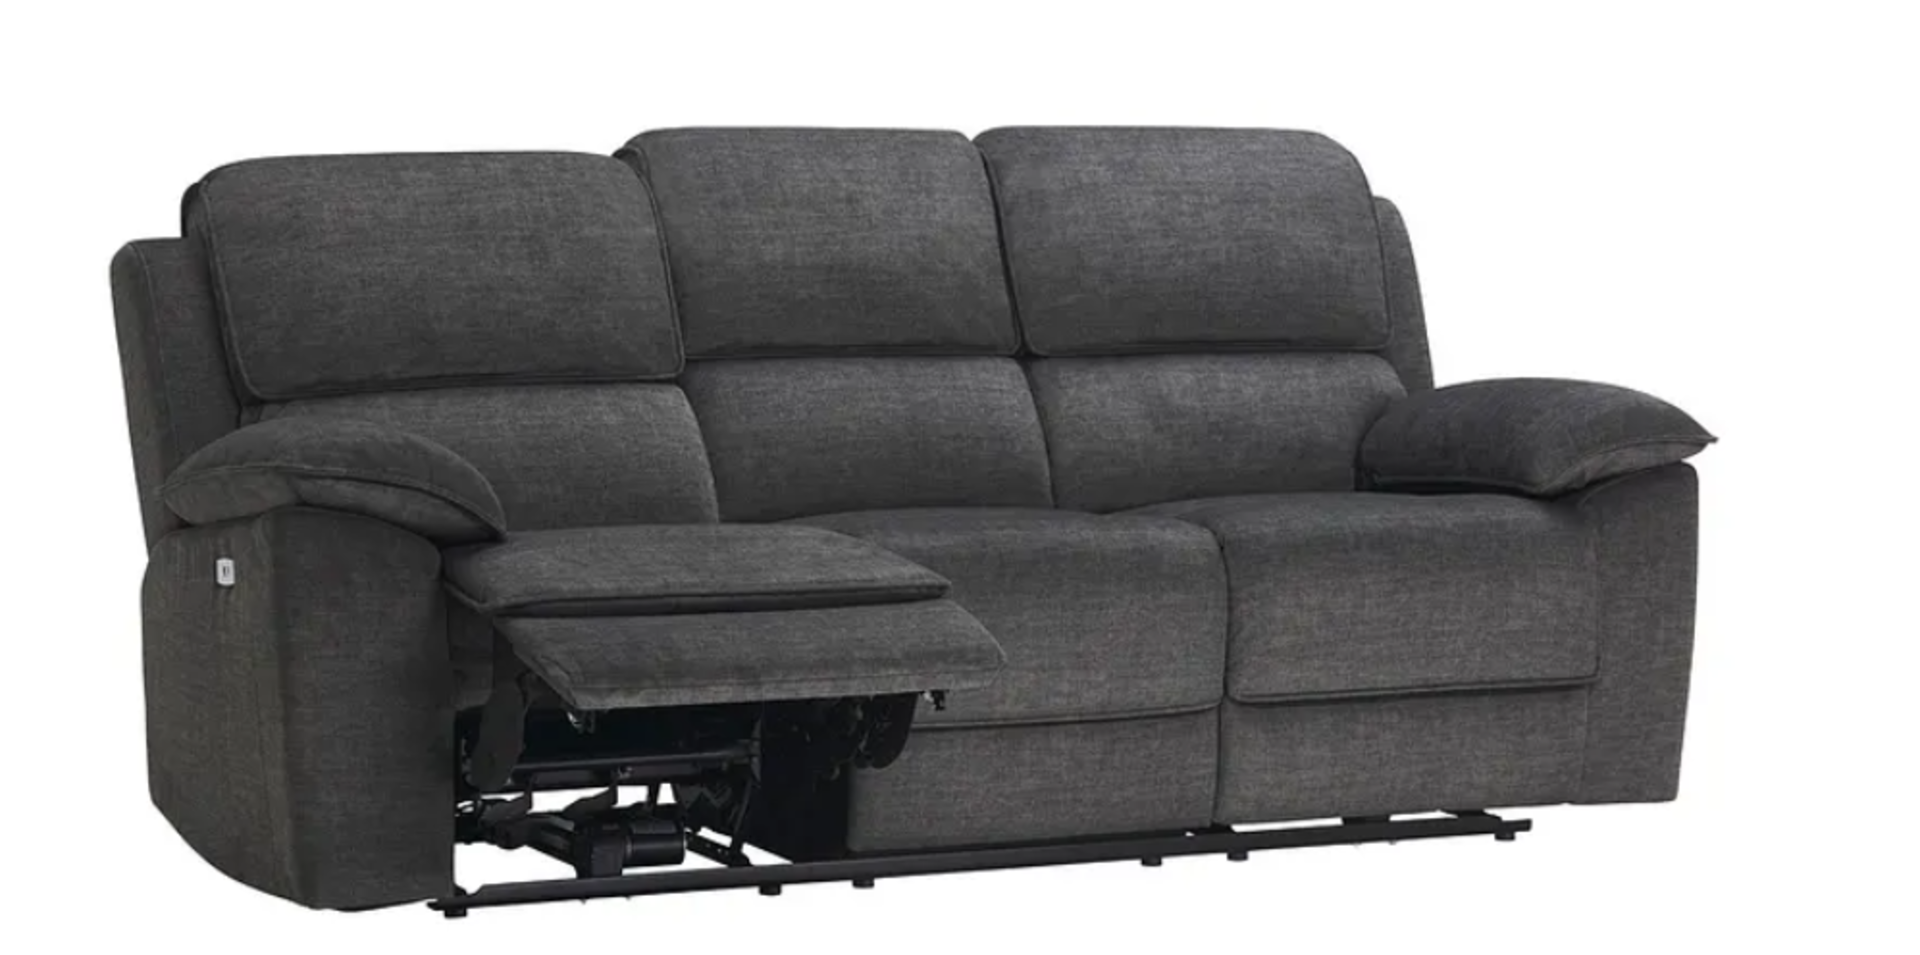 GOODWOOD 3 Seater Electric Recliner Sofa | Plush Charcoal Fabric. RRP £1,439.00. Ideal for those who